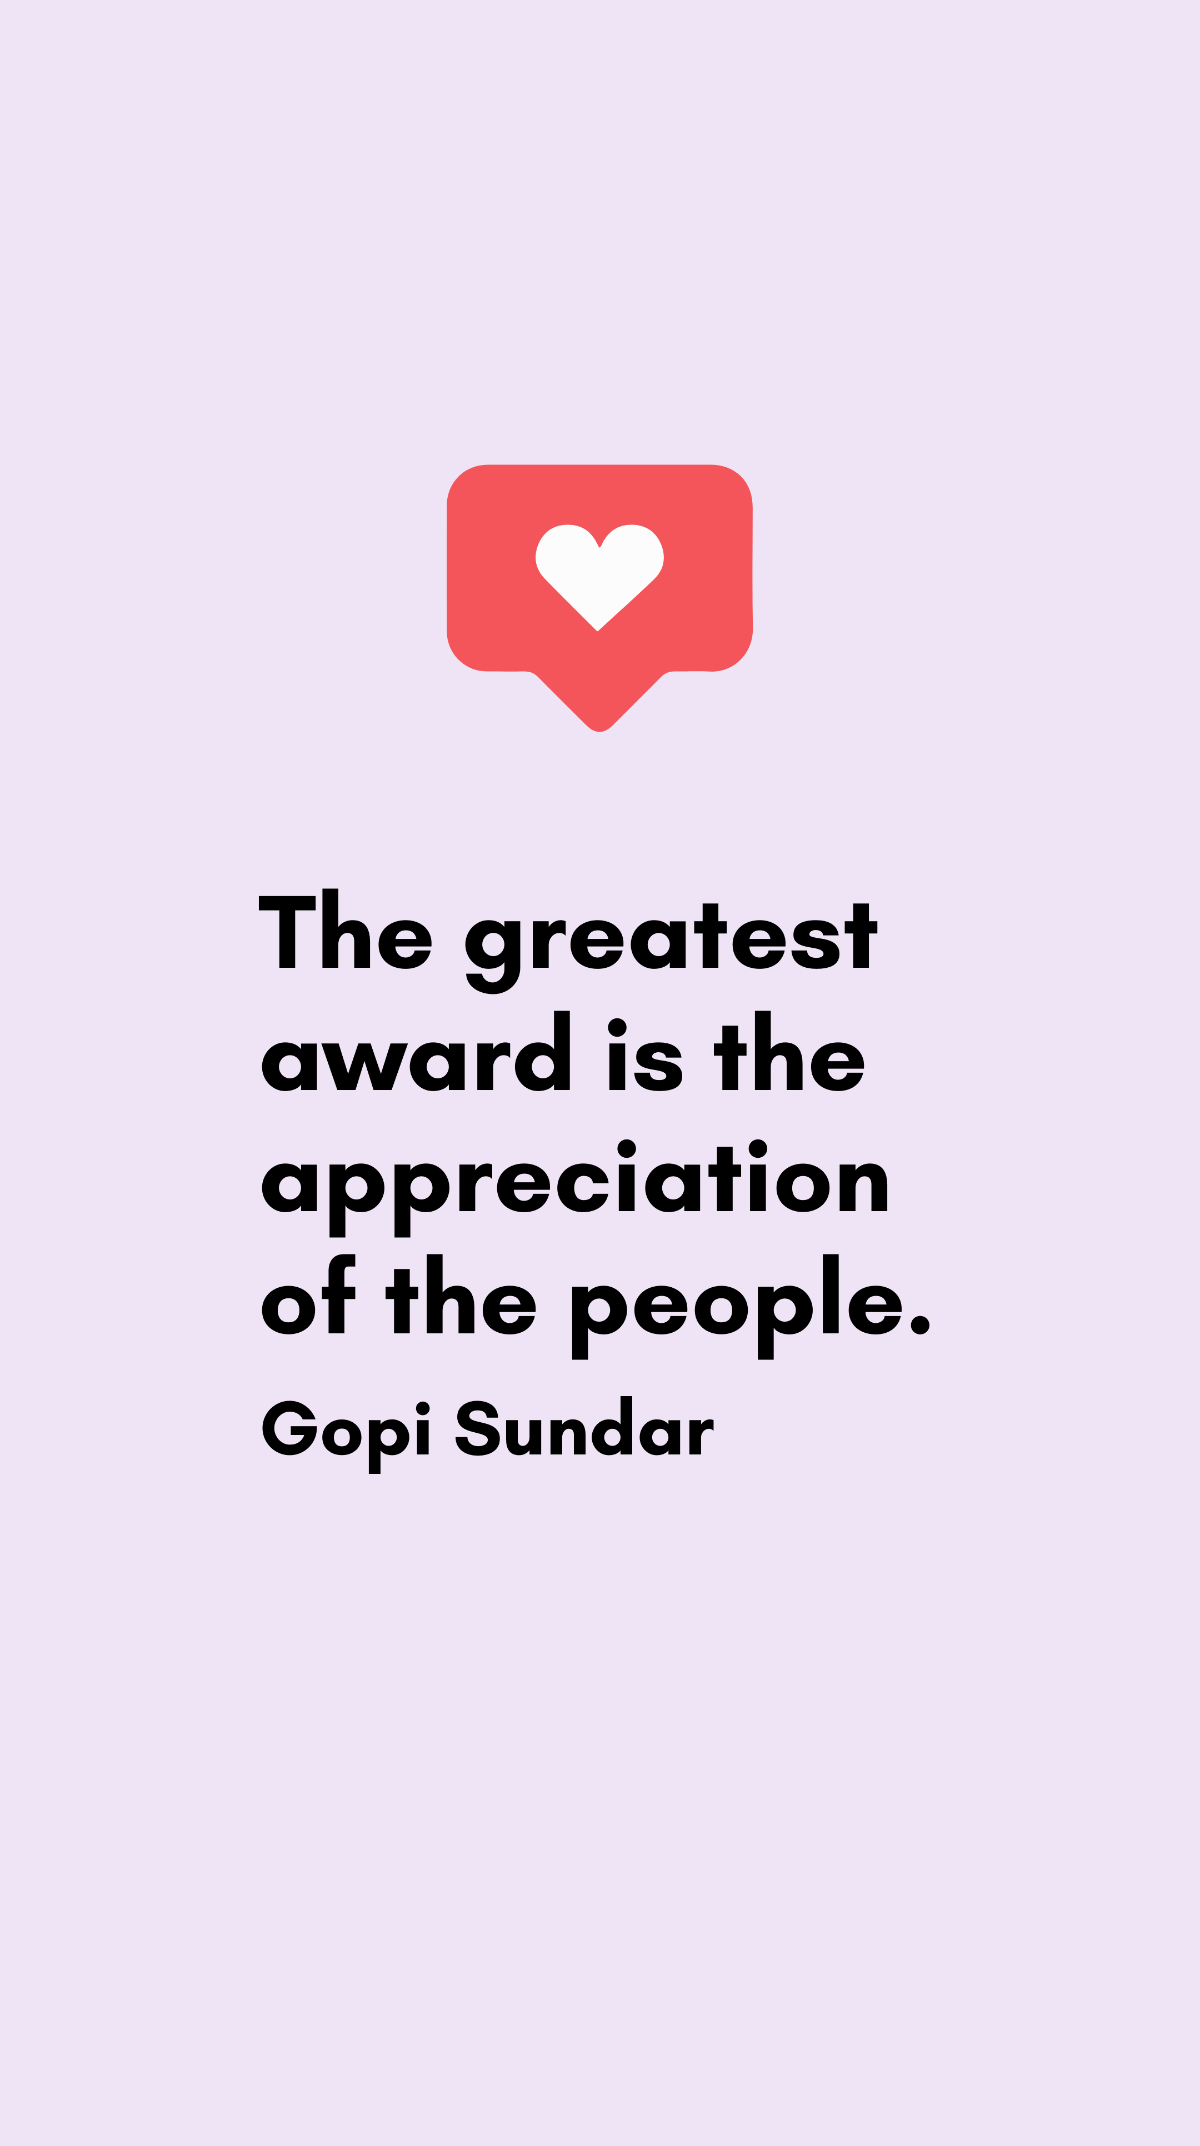 Gopi Sundar - The greatest award is the appreciation of the people.